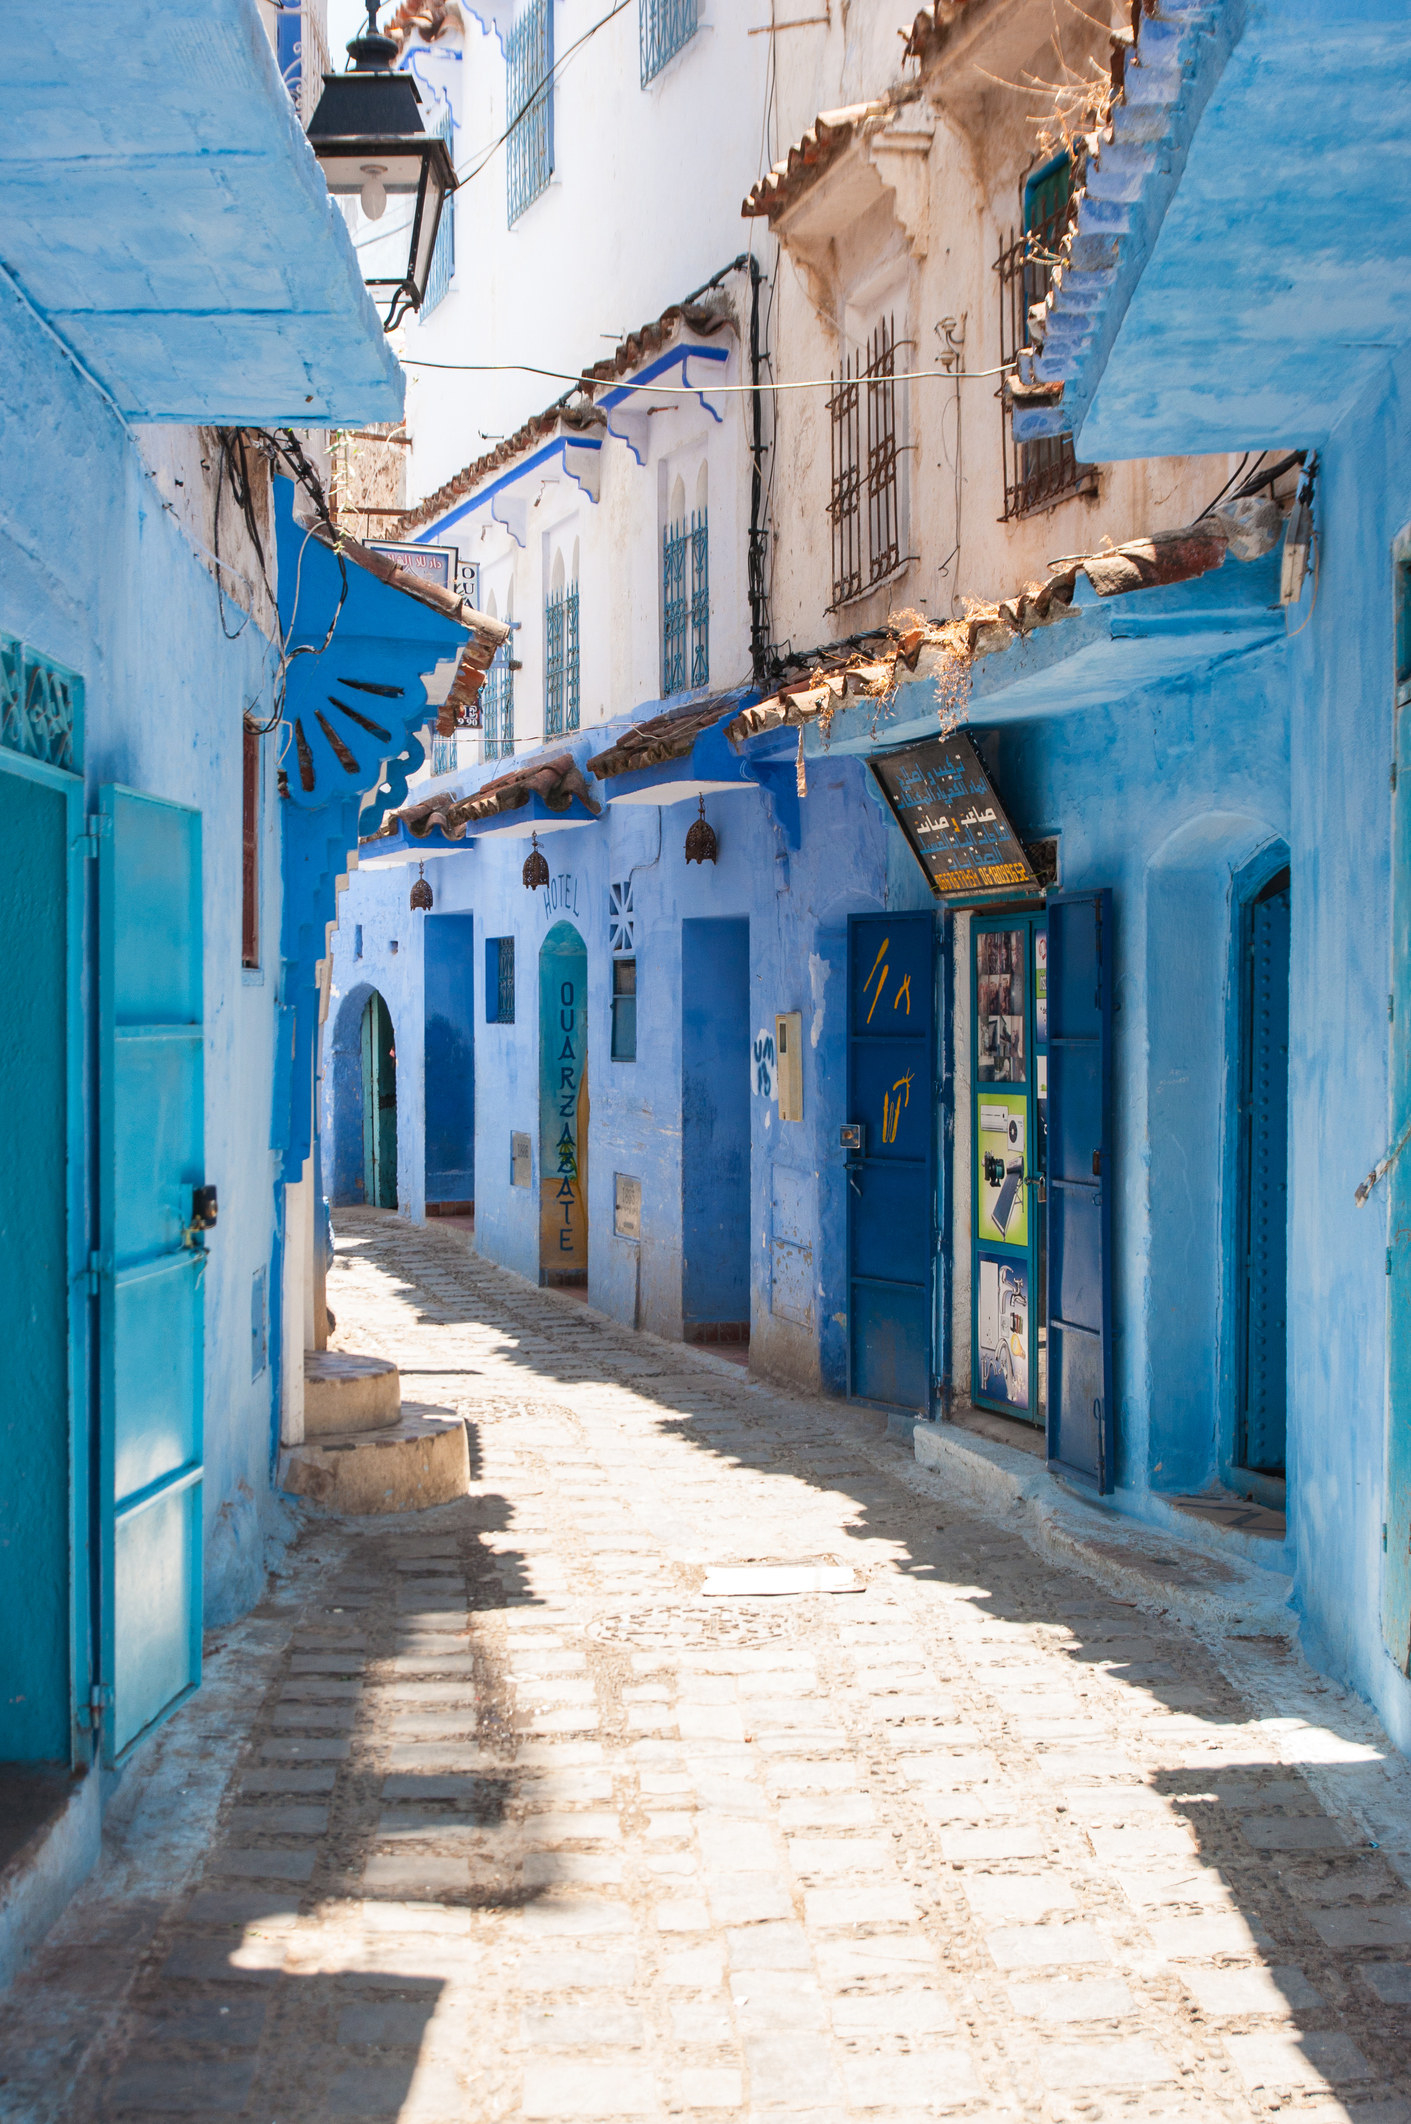 A street with blue painted houses.